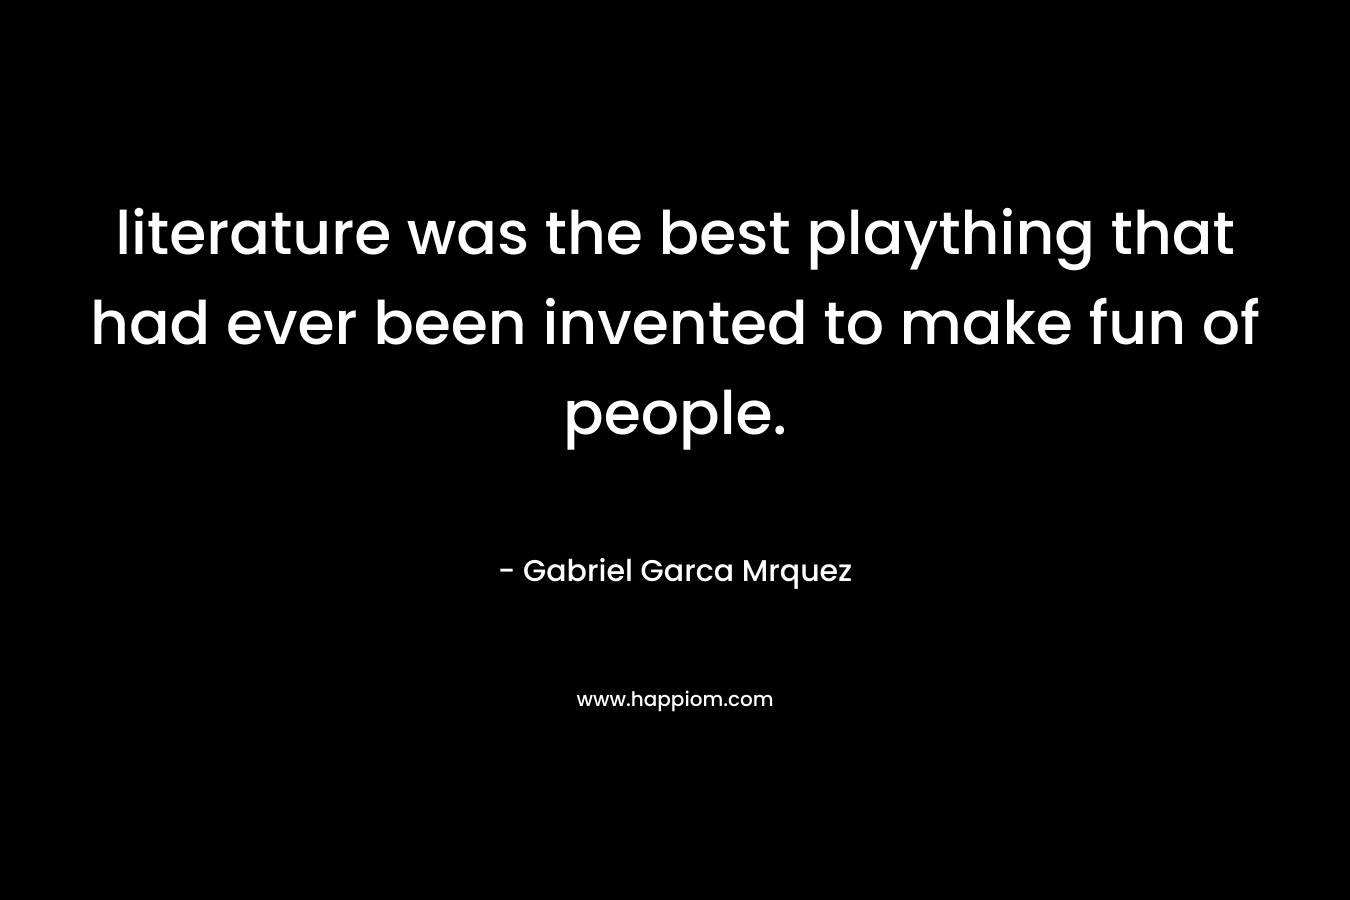 literature was the best plaything that had ever been invented to make fun of people. – Gabriel Garca Mrquez